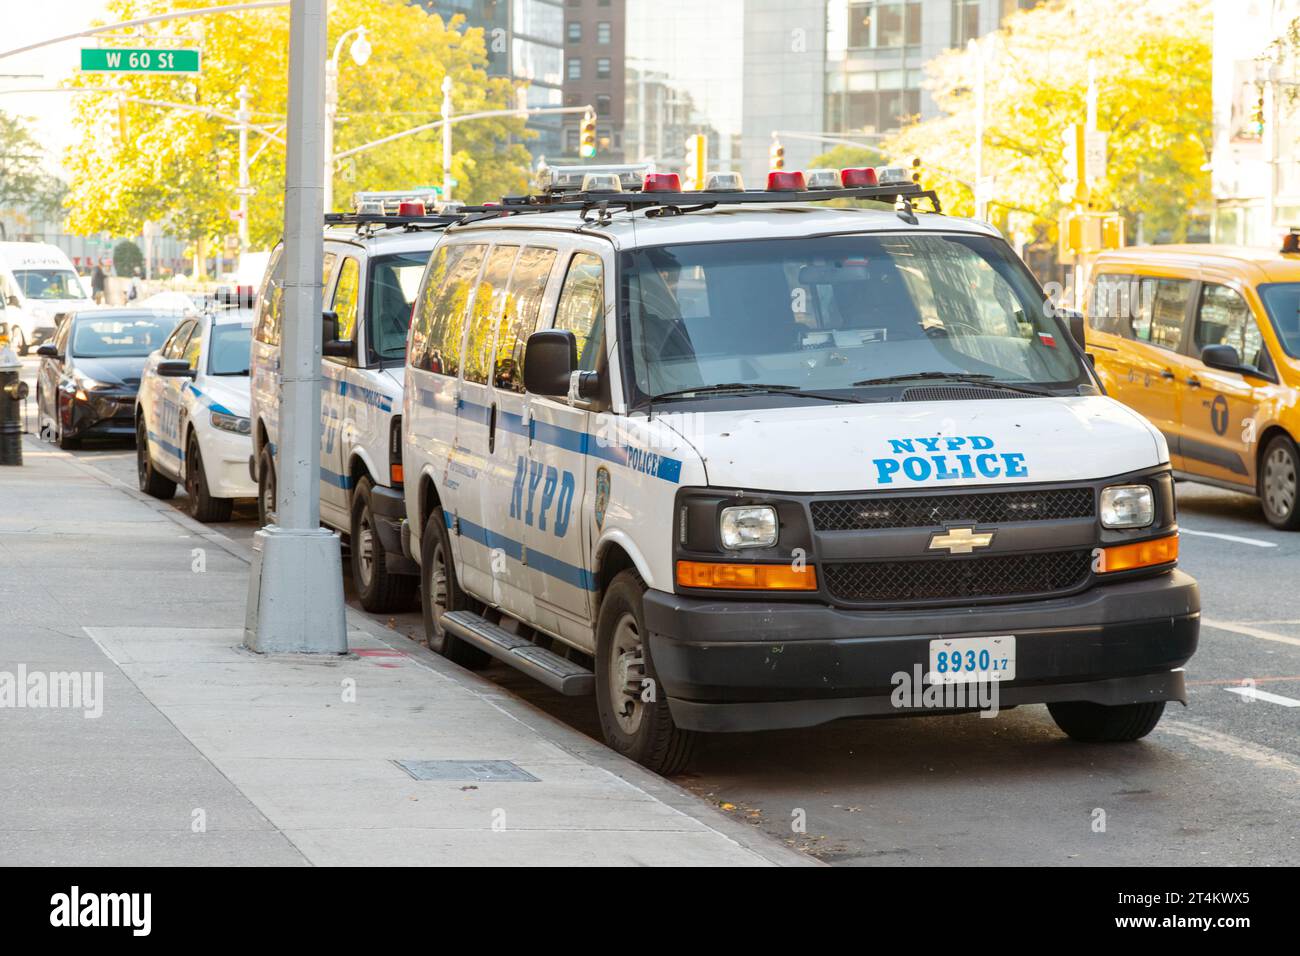 Police van, NYPD police truck, New York, United States of America. Stock Photo